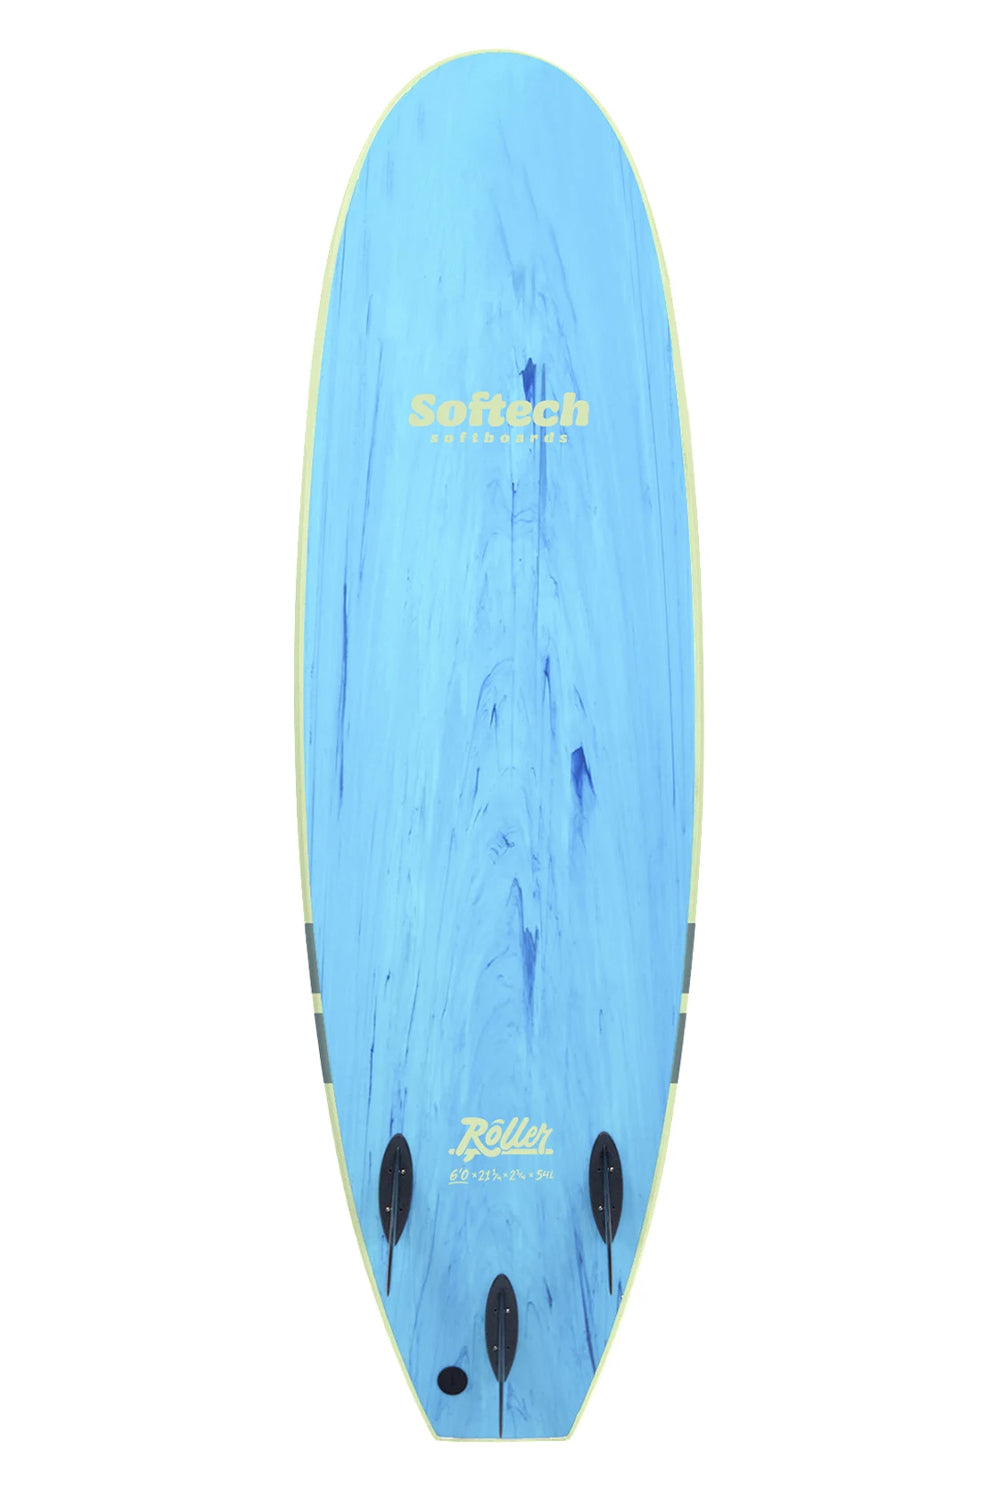 7'0 Softech Roller 2022 Softboard - Comes with fins